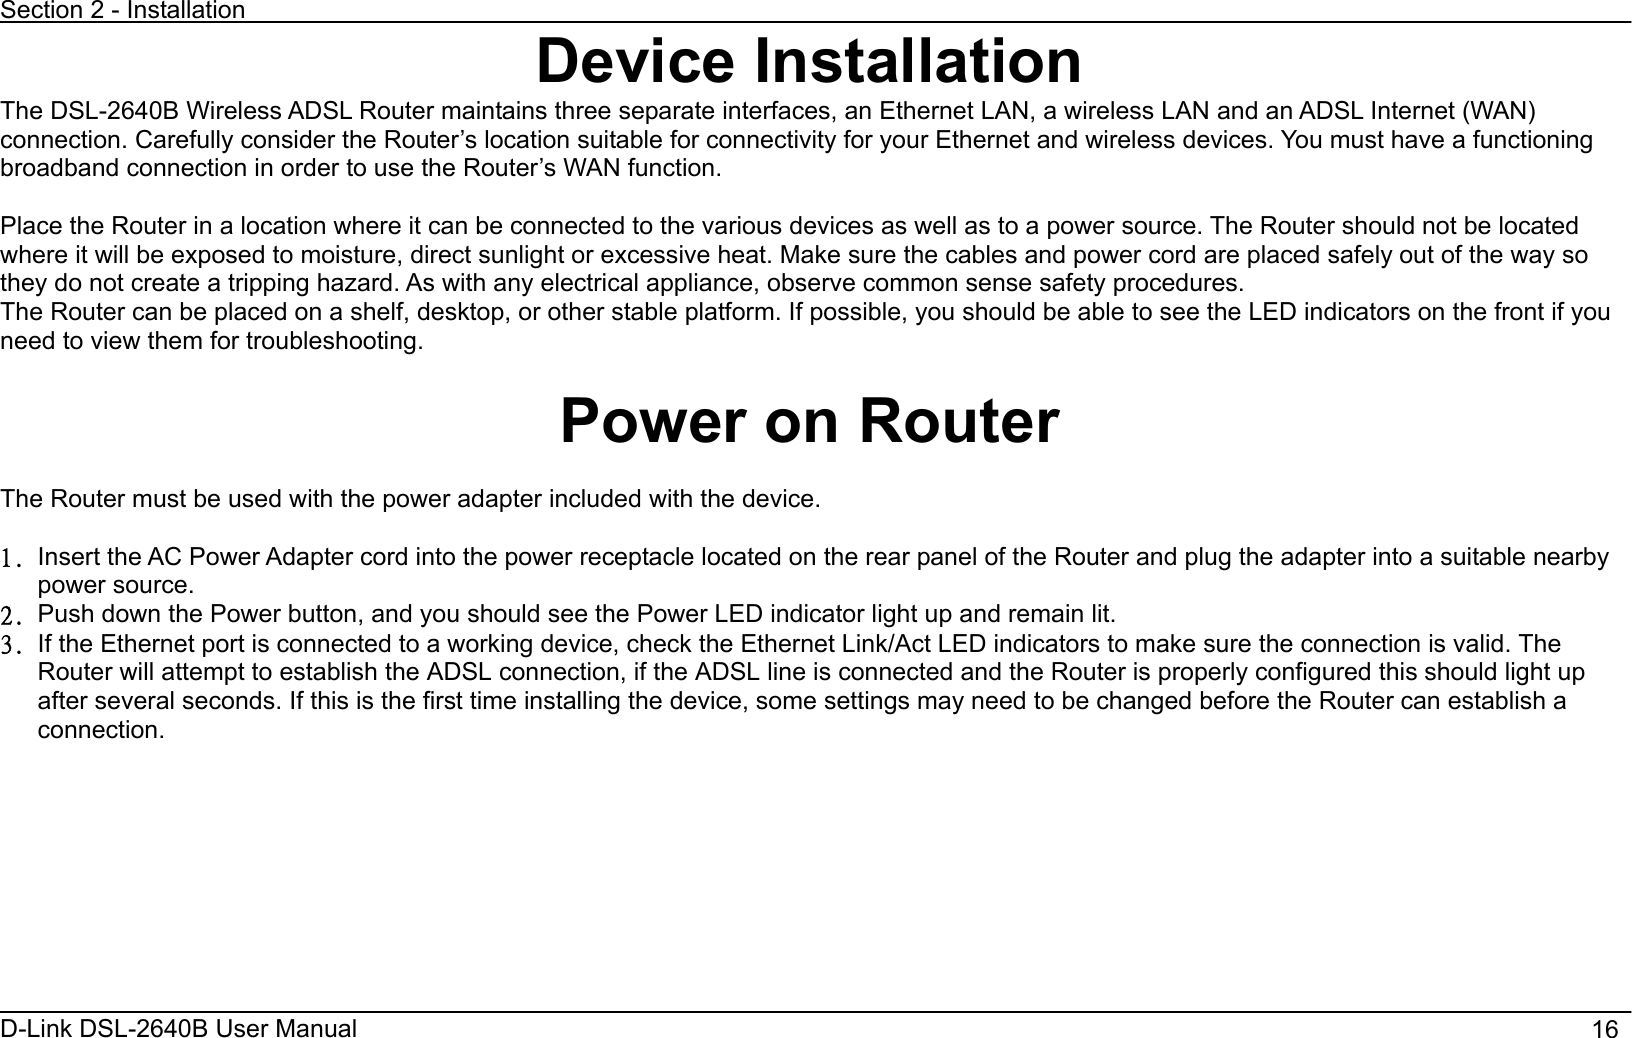 Section 2 - Installation D-Link DSL-2640B User Manual                                       16Device InstallationThe DSL-2640B Wireless ADSL Router maintains three separate interfaces, an Ethernet LAN, a wireless LAN and an ADSL Internet (WAN)connection. Carefully consider the Router’s location suitable for connectivity for your Ethernet and wireless devices. You must have a functioning broadband connection in order to use the Router’s WAN function.   Place the Router in a location where it can be connected to the various devices as well as to a power source. The Router should not be located where it will be exposed to moisture, direct sunlight or excessive heat. Make sure the cables and power cord are placed safely out of the way so they do not create a tripping hazard. As with any electrical appliance, observe common sense safety procedures. The Router can be placed on a shelf, desktop, or other stable platform. If possible, you should be able to see the LED indicators on the front if you need to view them for troubleshooting.   Power on Router The Router must be used with the power adapter included with the device. 2/ Insert the AC Power Adapter cord into the power receptacle located on the rear panel of the Router and plug the adapter into a suitable nearby power source. 3/ Push down the Power button, and you should see the Power LED indicator light up and remain lit.   4/ If the Ethernet port is connected to a working device, check the Ethernet Link/Act LED indicators to make sure the connection is valid. The Router will attempt to establish the ADSL connection, if the ADSL line is connected and the Router is properly configured this should light up after several seconds. If this is the first time installing the device, some settings may need to be changed before the Router can establish a connection.   